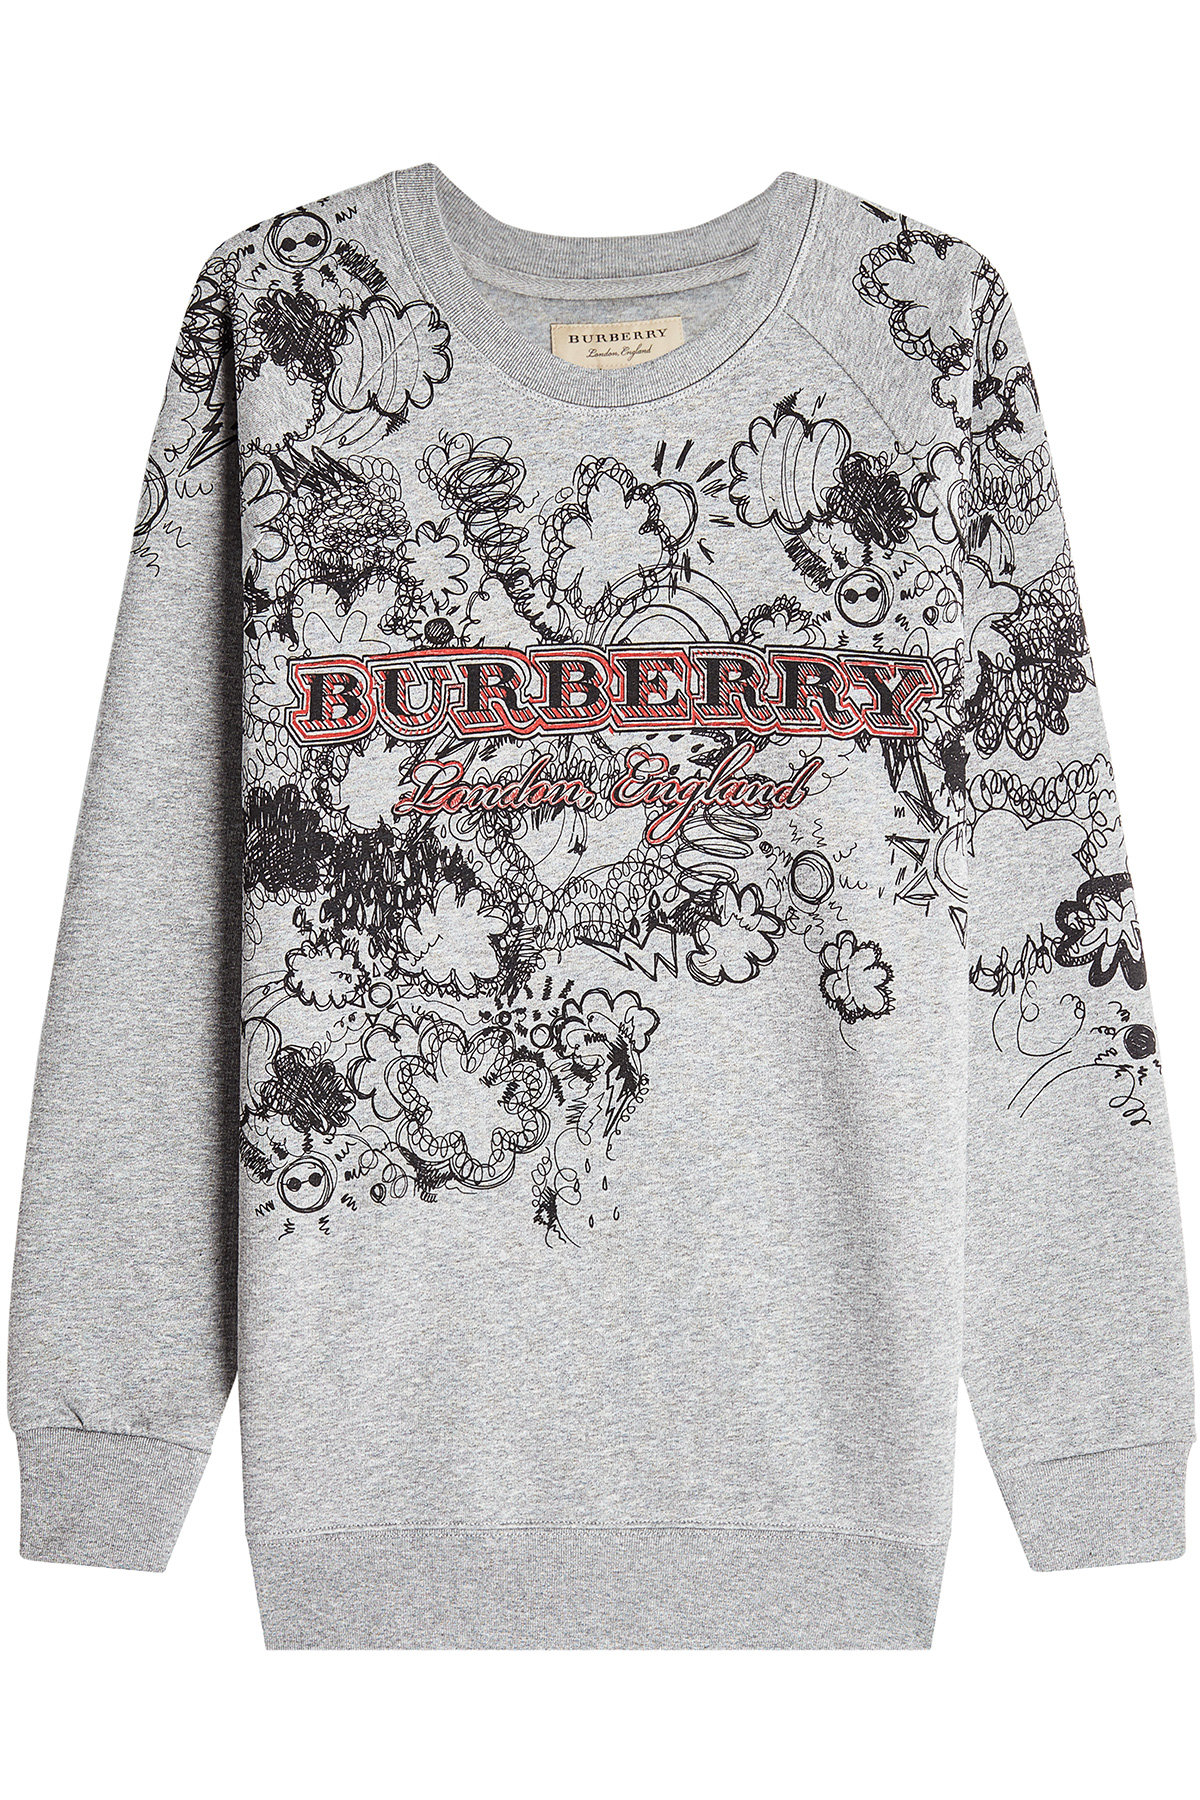 Barford Doodle Cotton Sweatshirt by Burberry